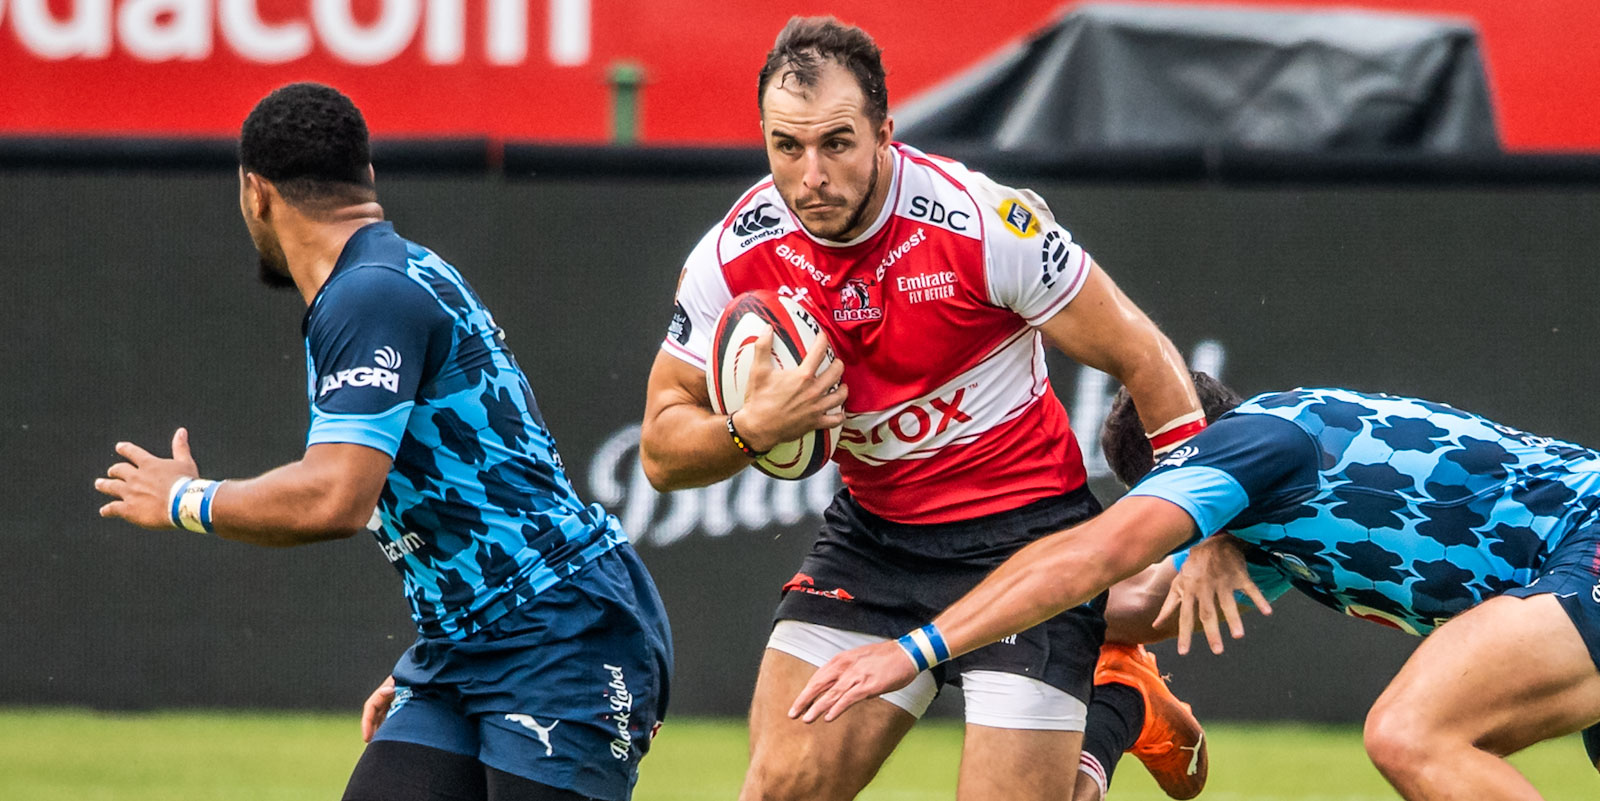 Burger Odendaal will return to his old stomping ground for the Carling Currie Cup semi-final